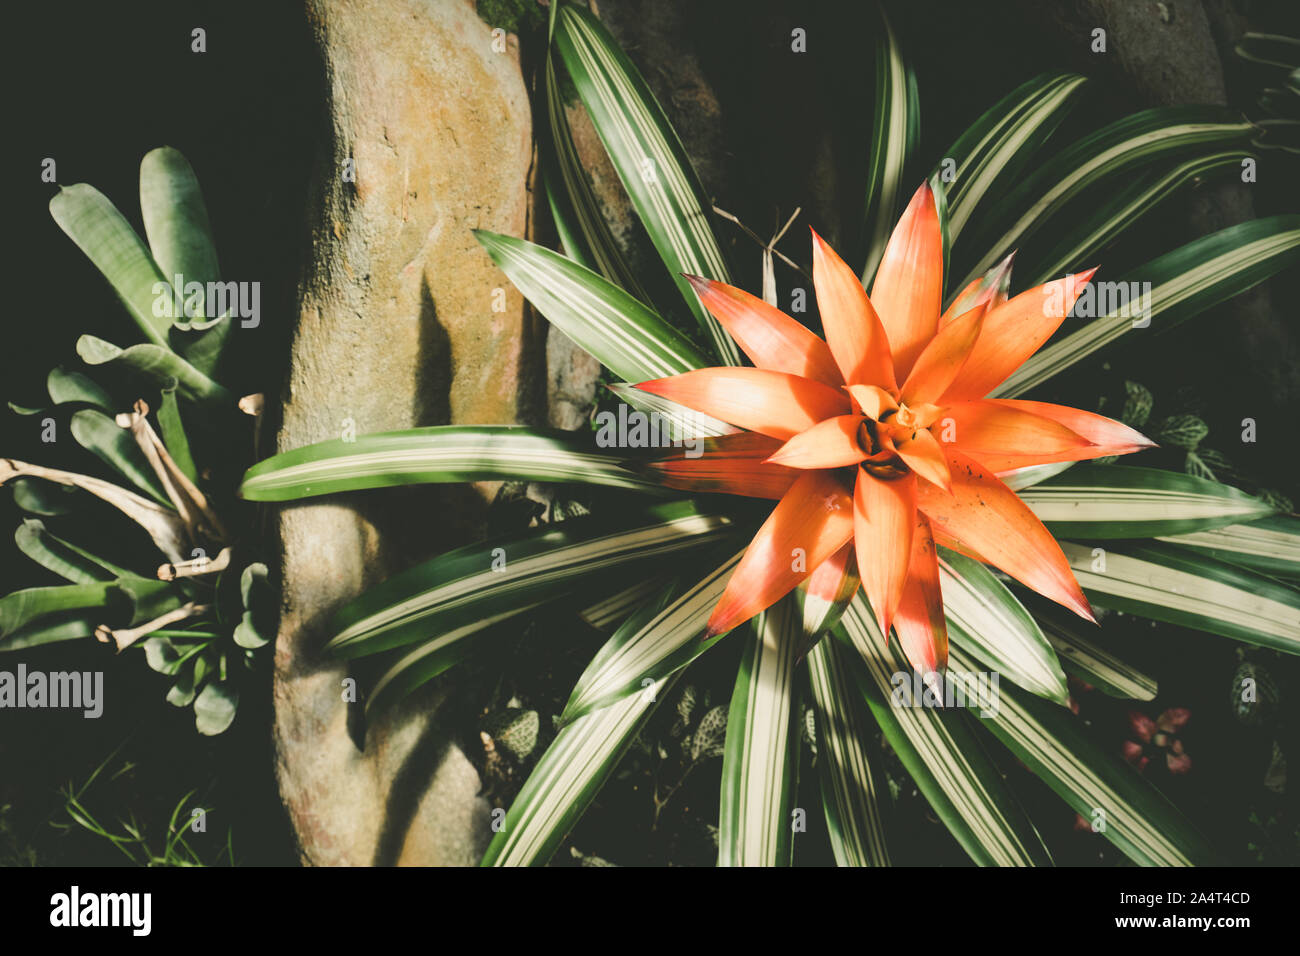 Top view of red bromeliad plant among stones Stock Photo